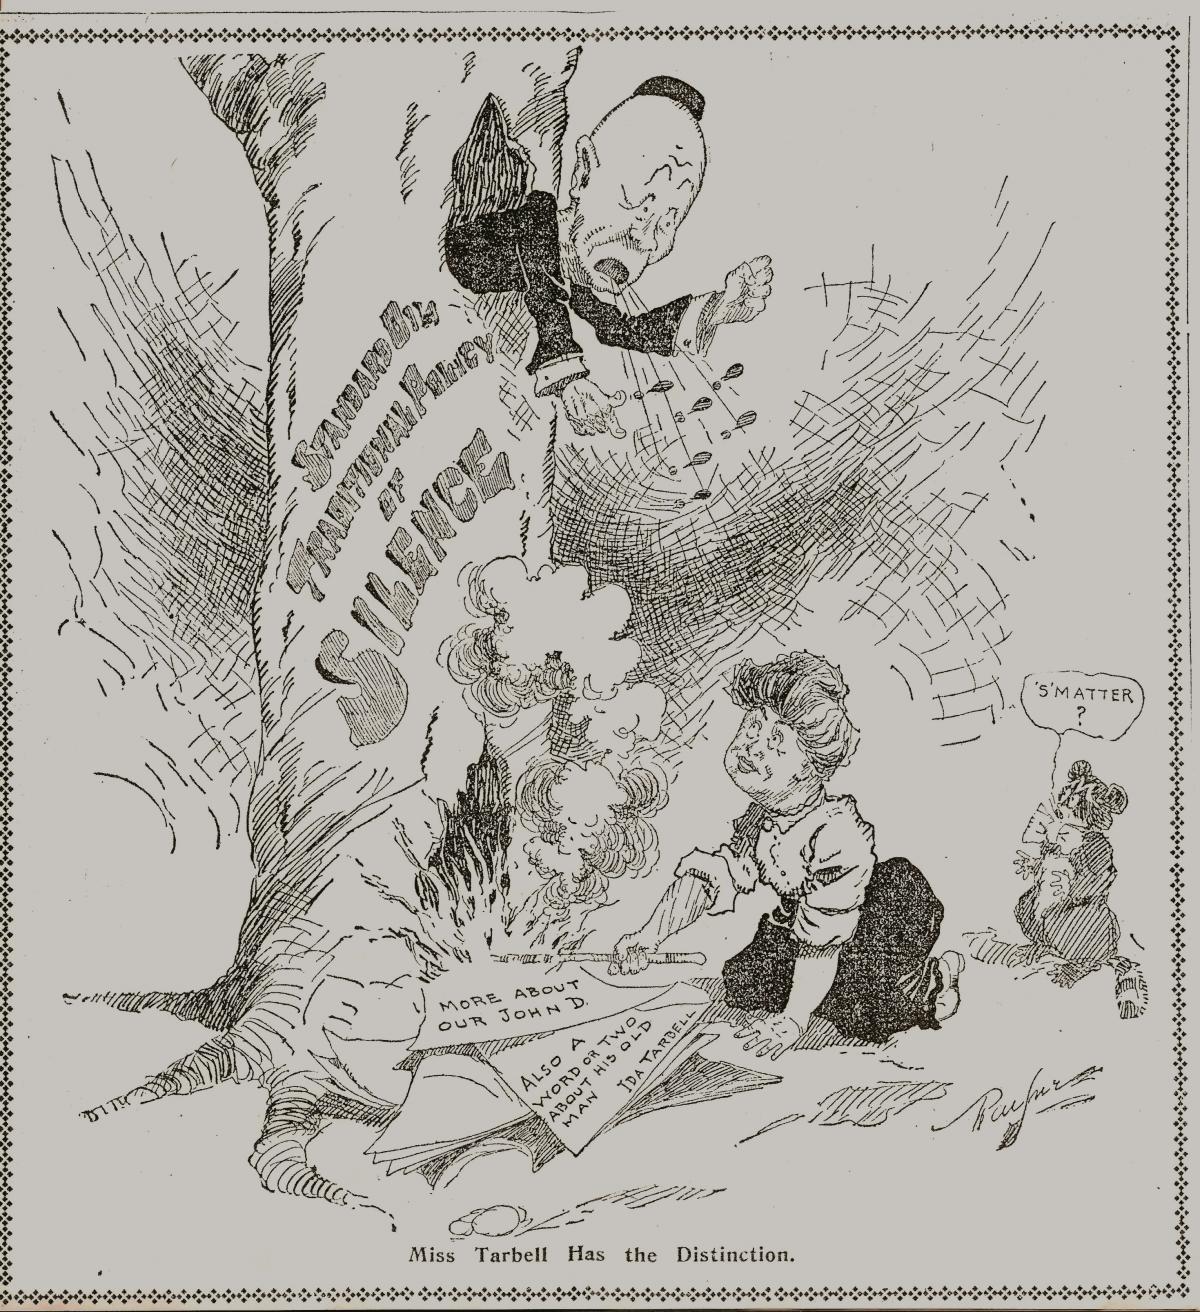 Political cartoon depicting a man in a tree and a woman fanning flames